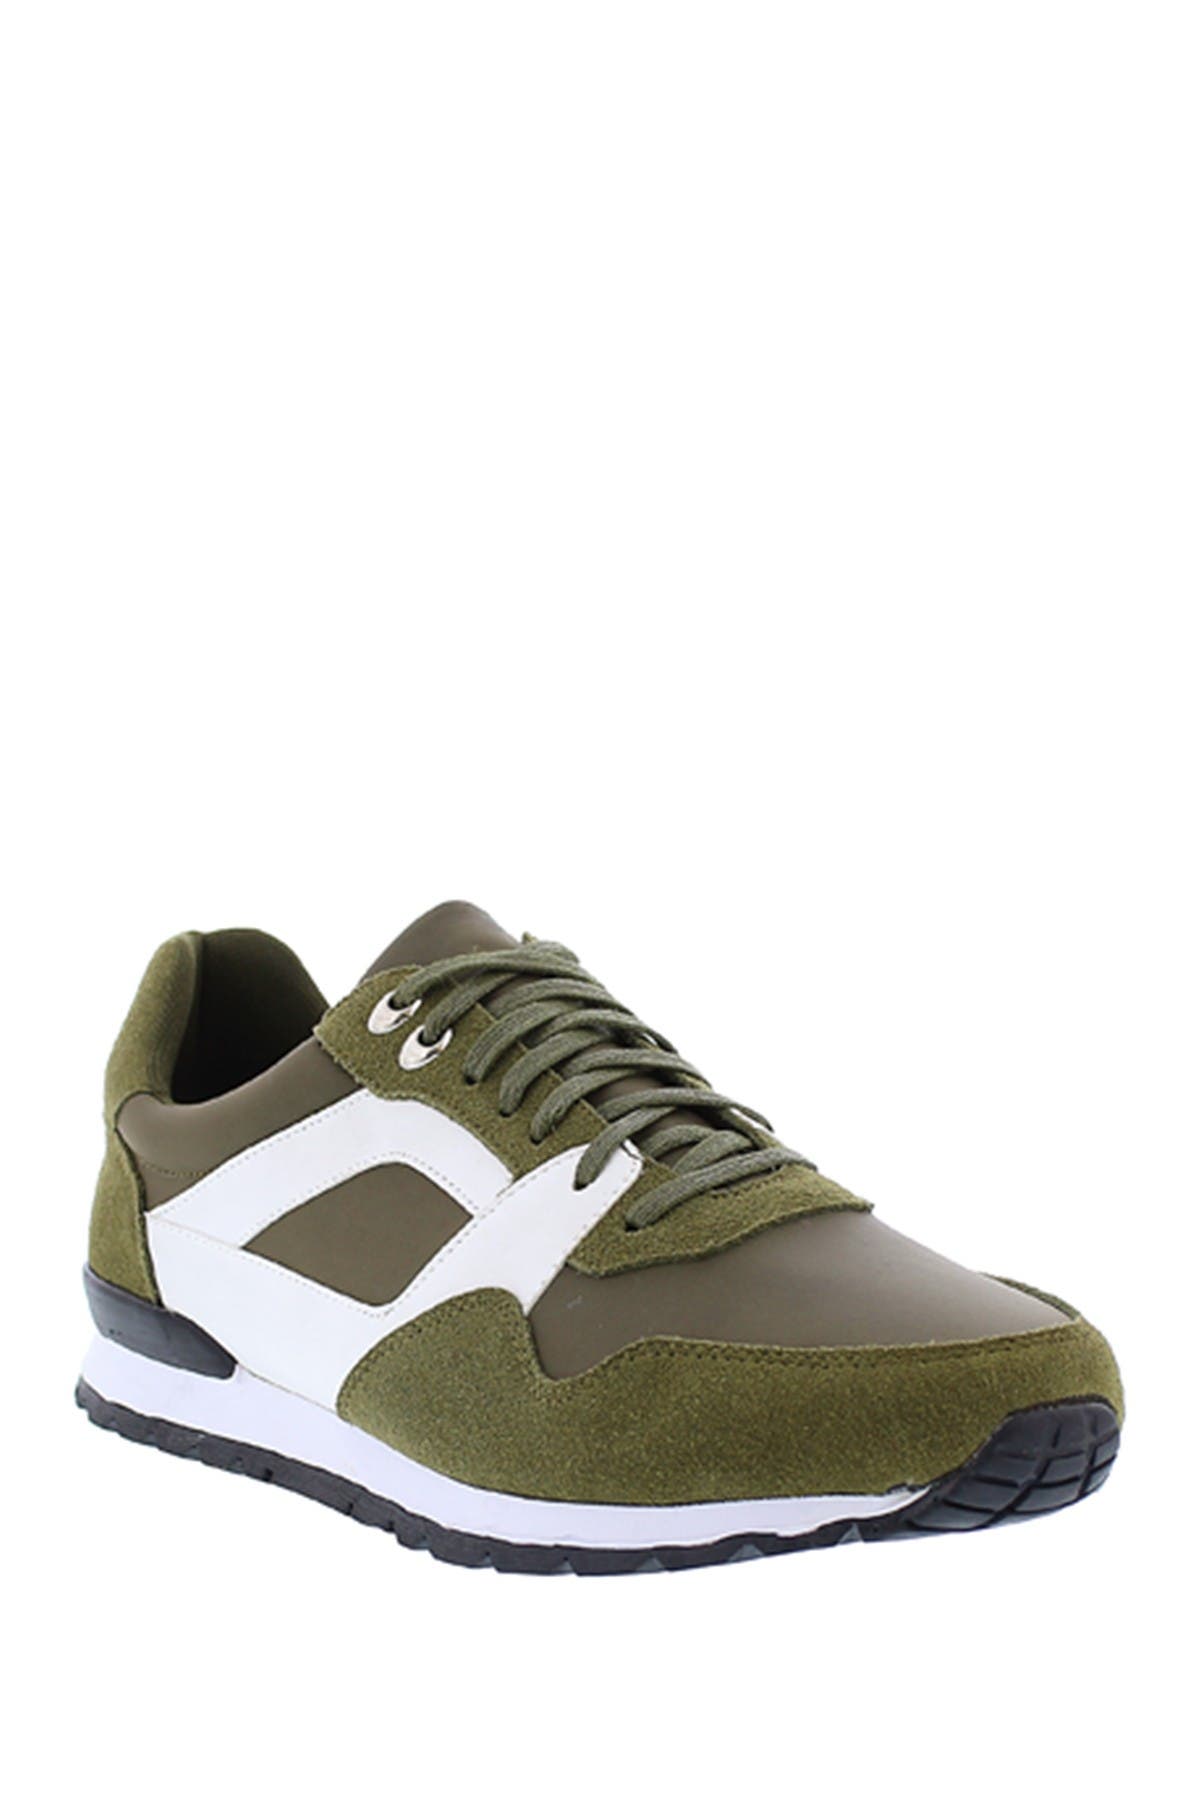 English Laundry Delvin Sneaker In Olive